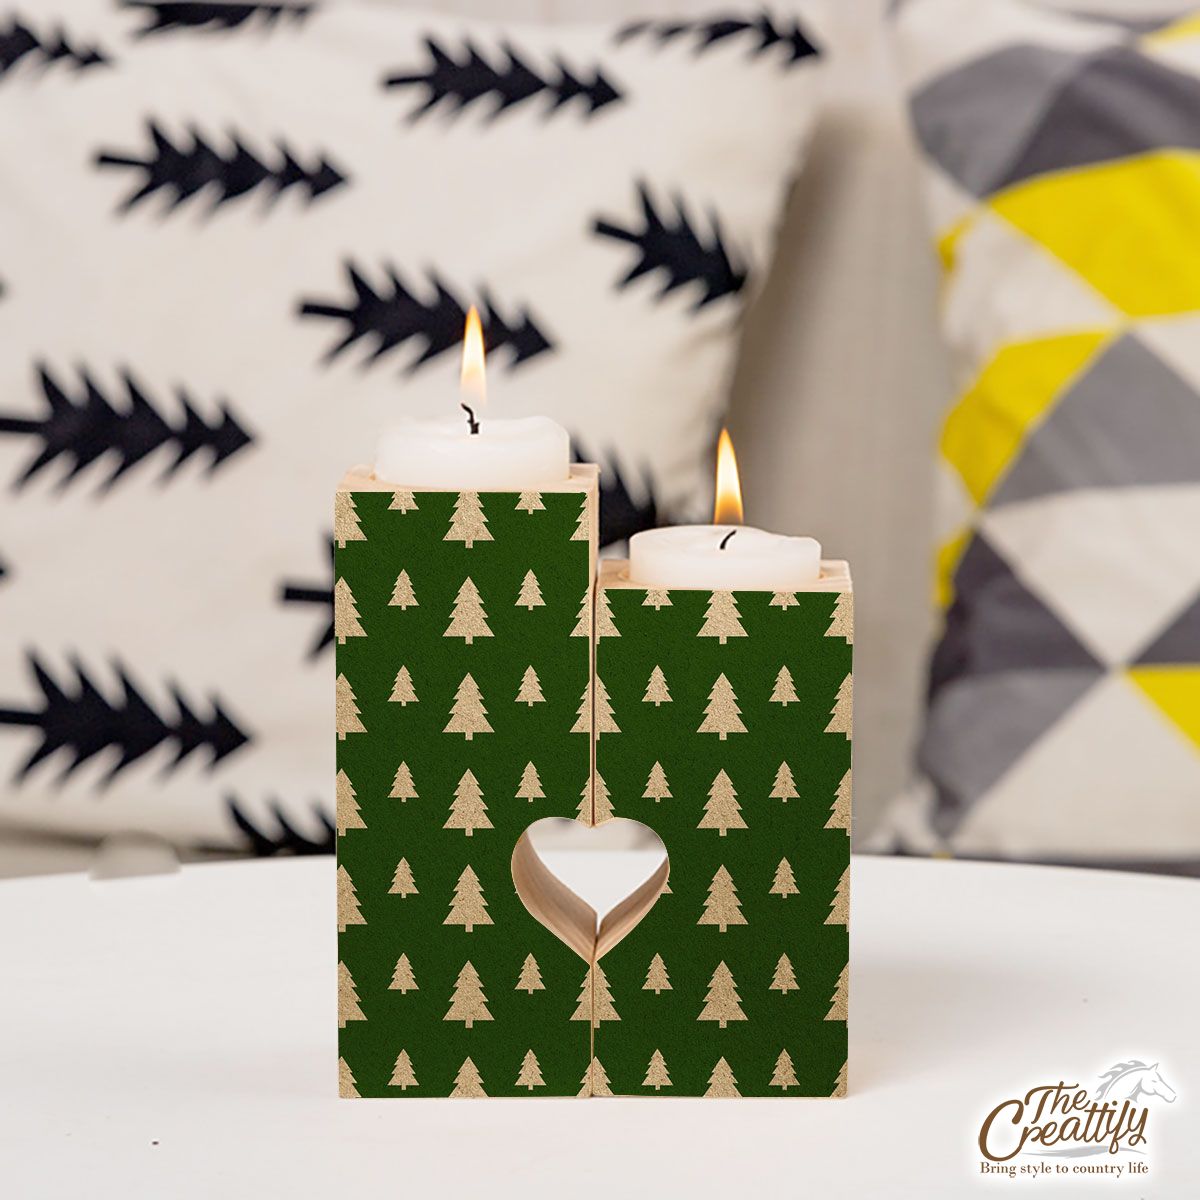 Christmas Tree, Christmas Tree Decorations, Pine Tree Pattern On Green 2 Heart Wooden Candlestick | Wooden